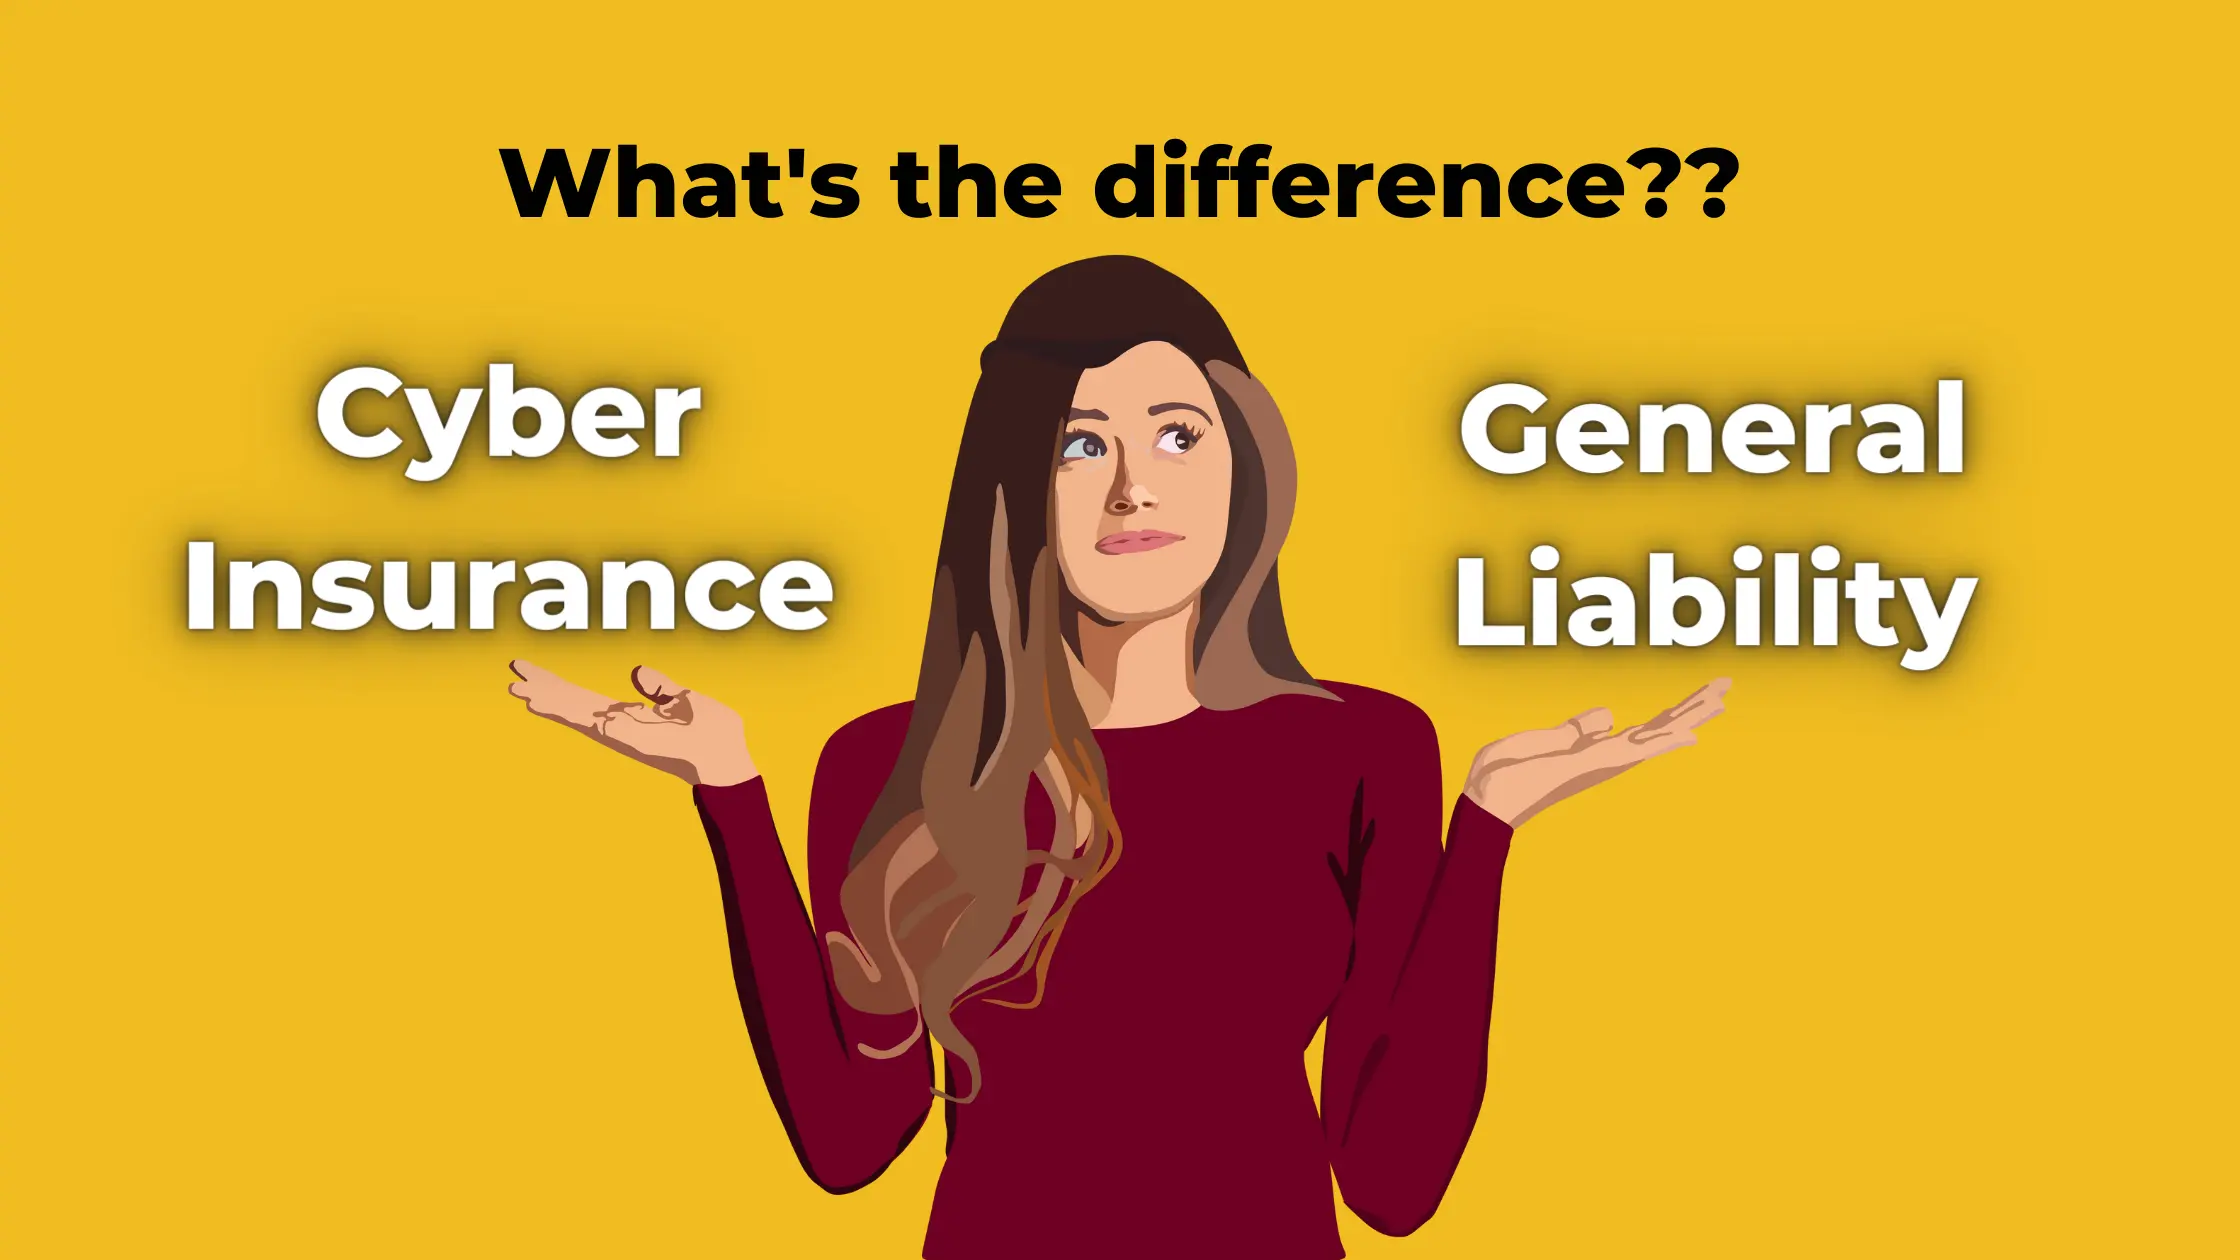 Cyber Insurance vs General Liability Insurance: What's the difference?